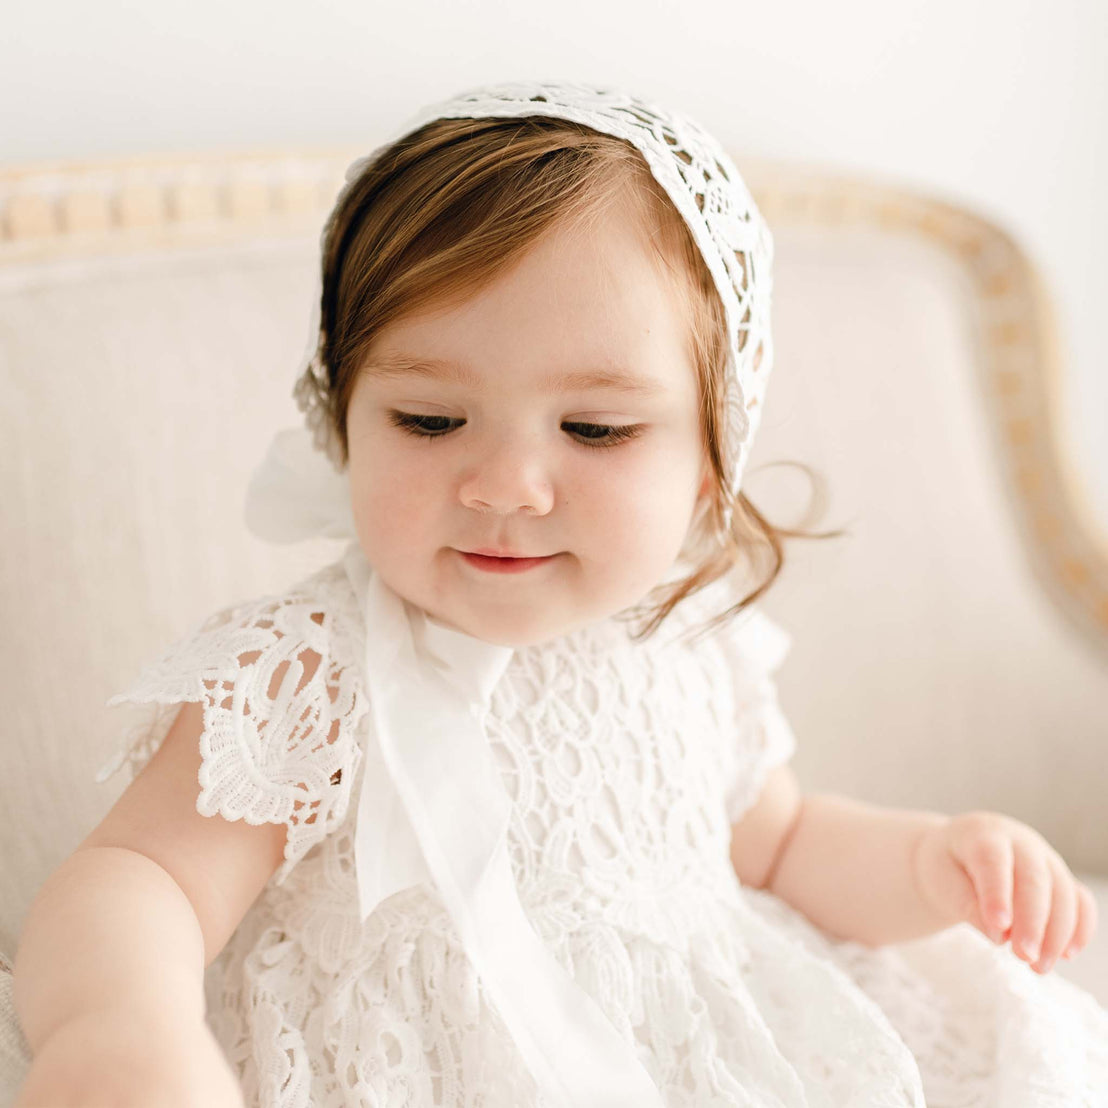 Baby girl on a couch and wearing the Lola Christening Gown and Bonnet, a baptismal gown made with a cotton undergown in light ivory featuring an all-over lace overlay.